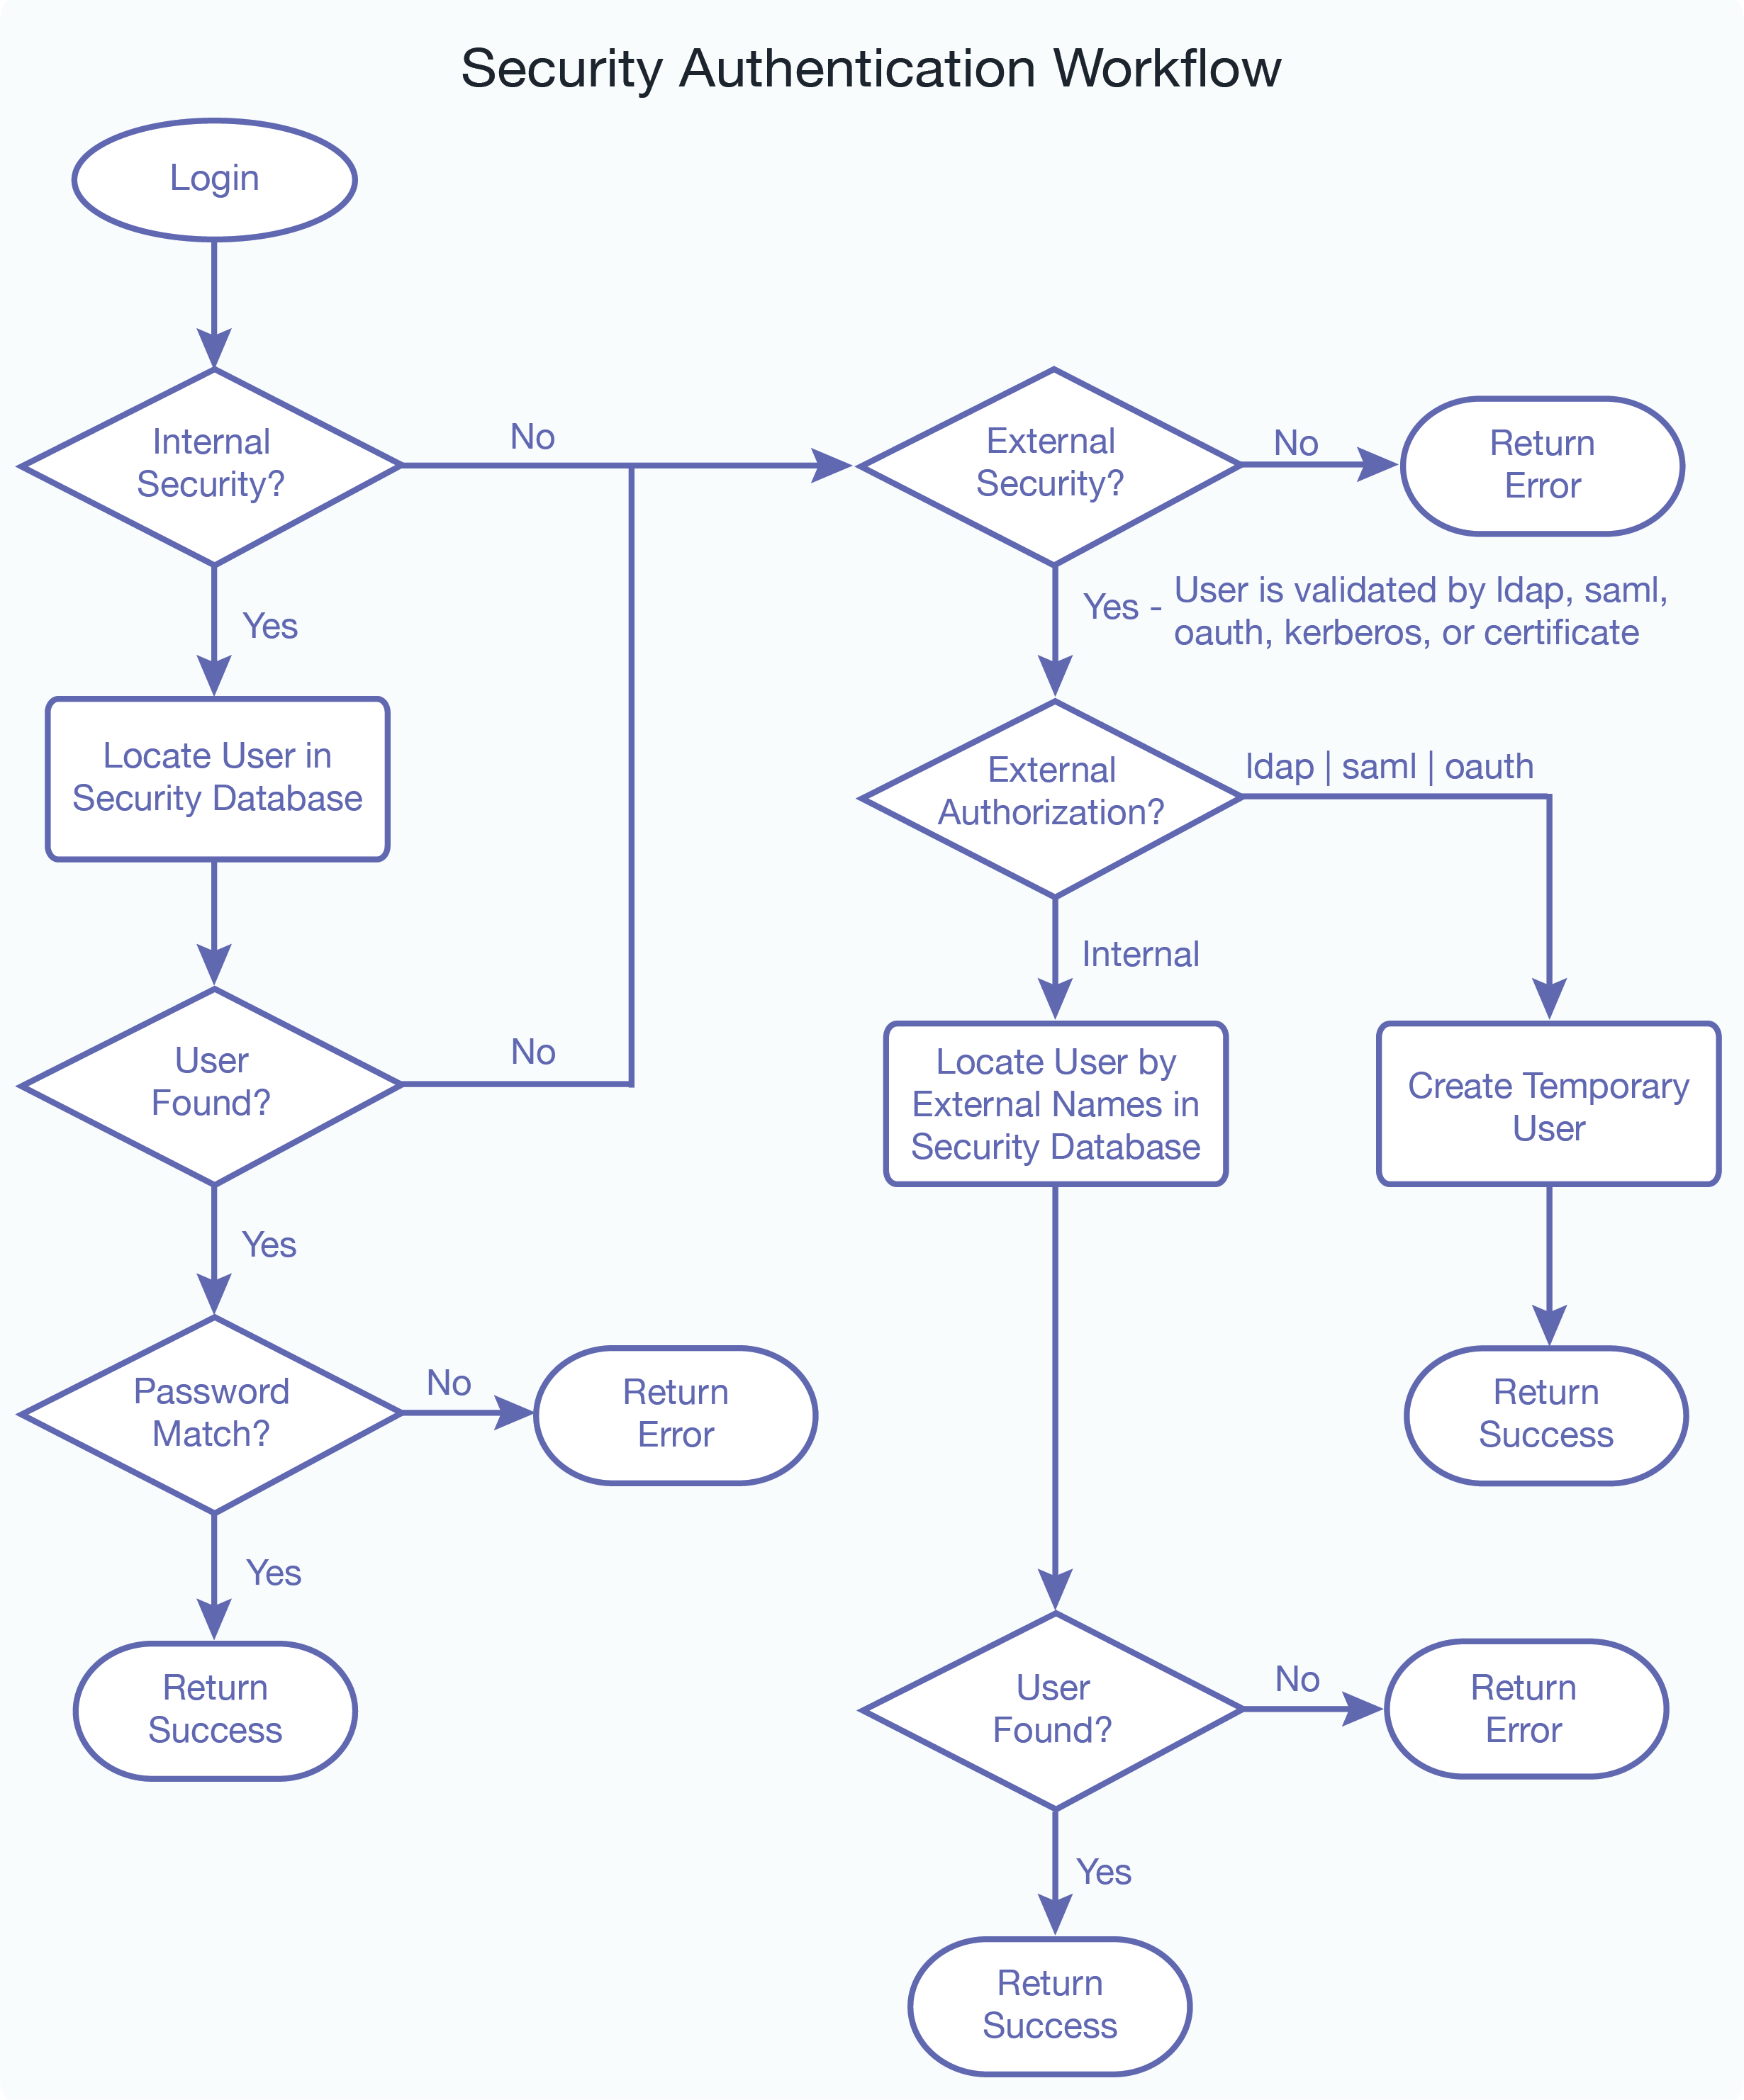 Flowchart of security authentication workflow